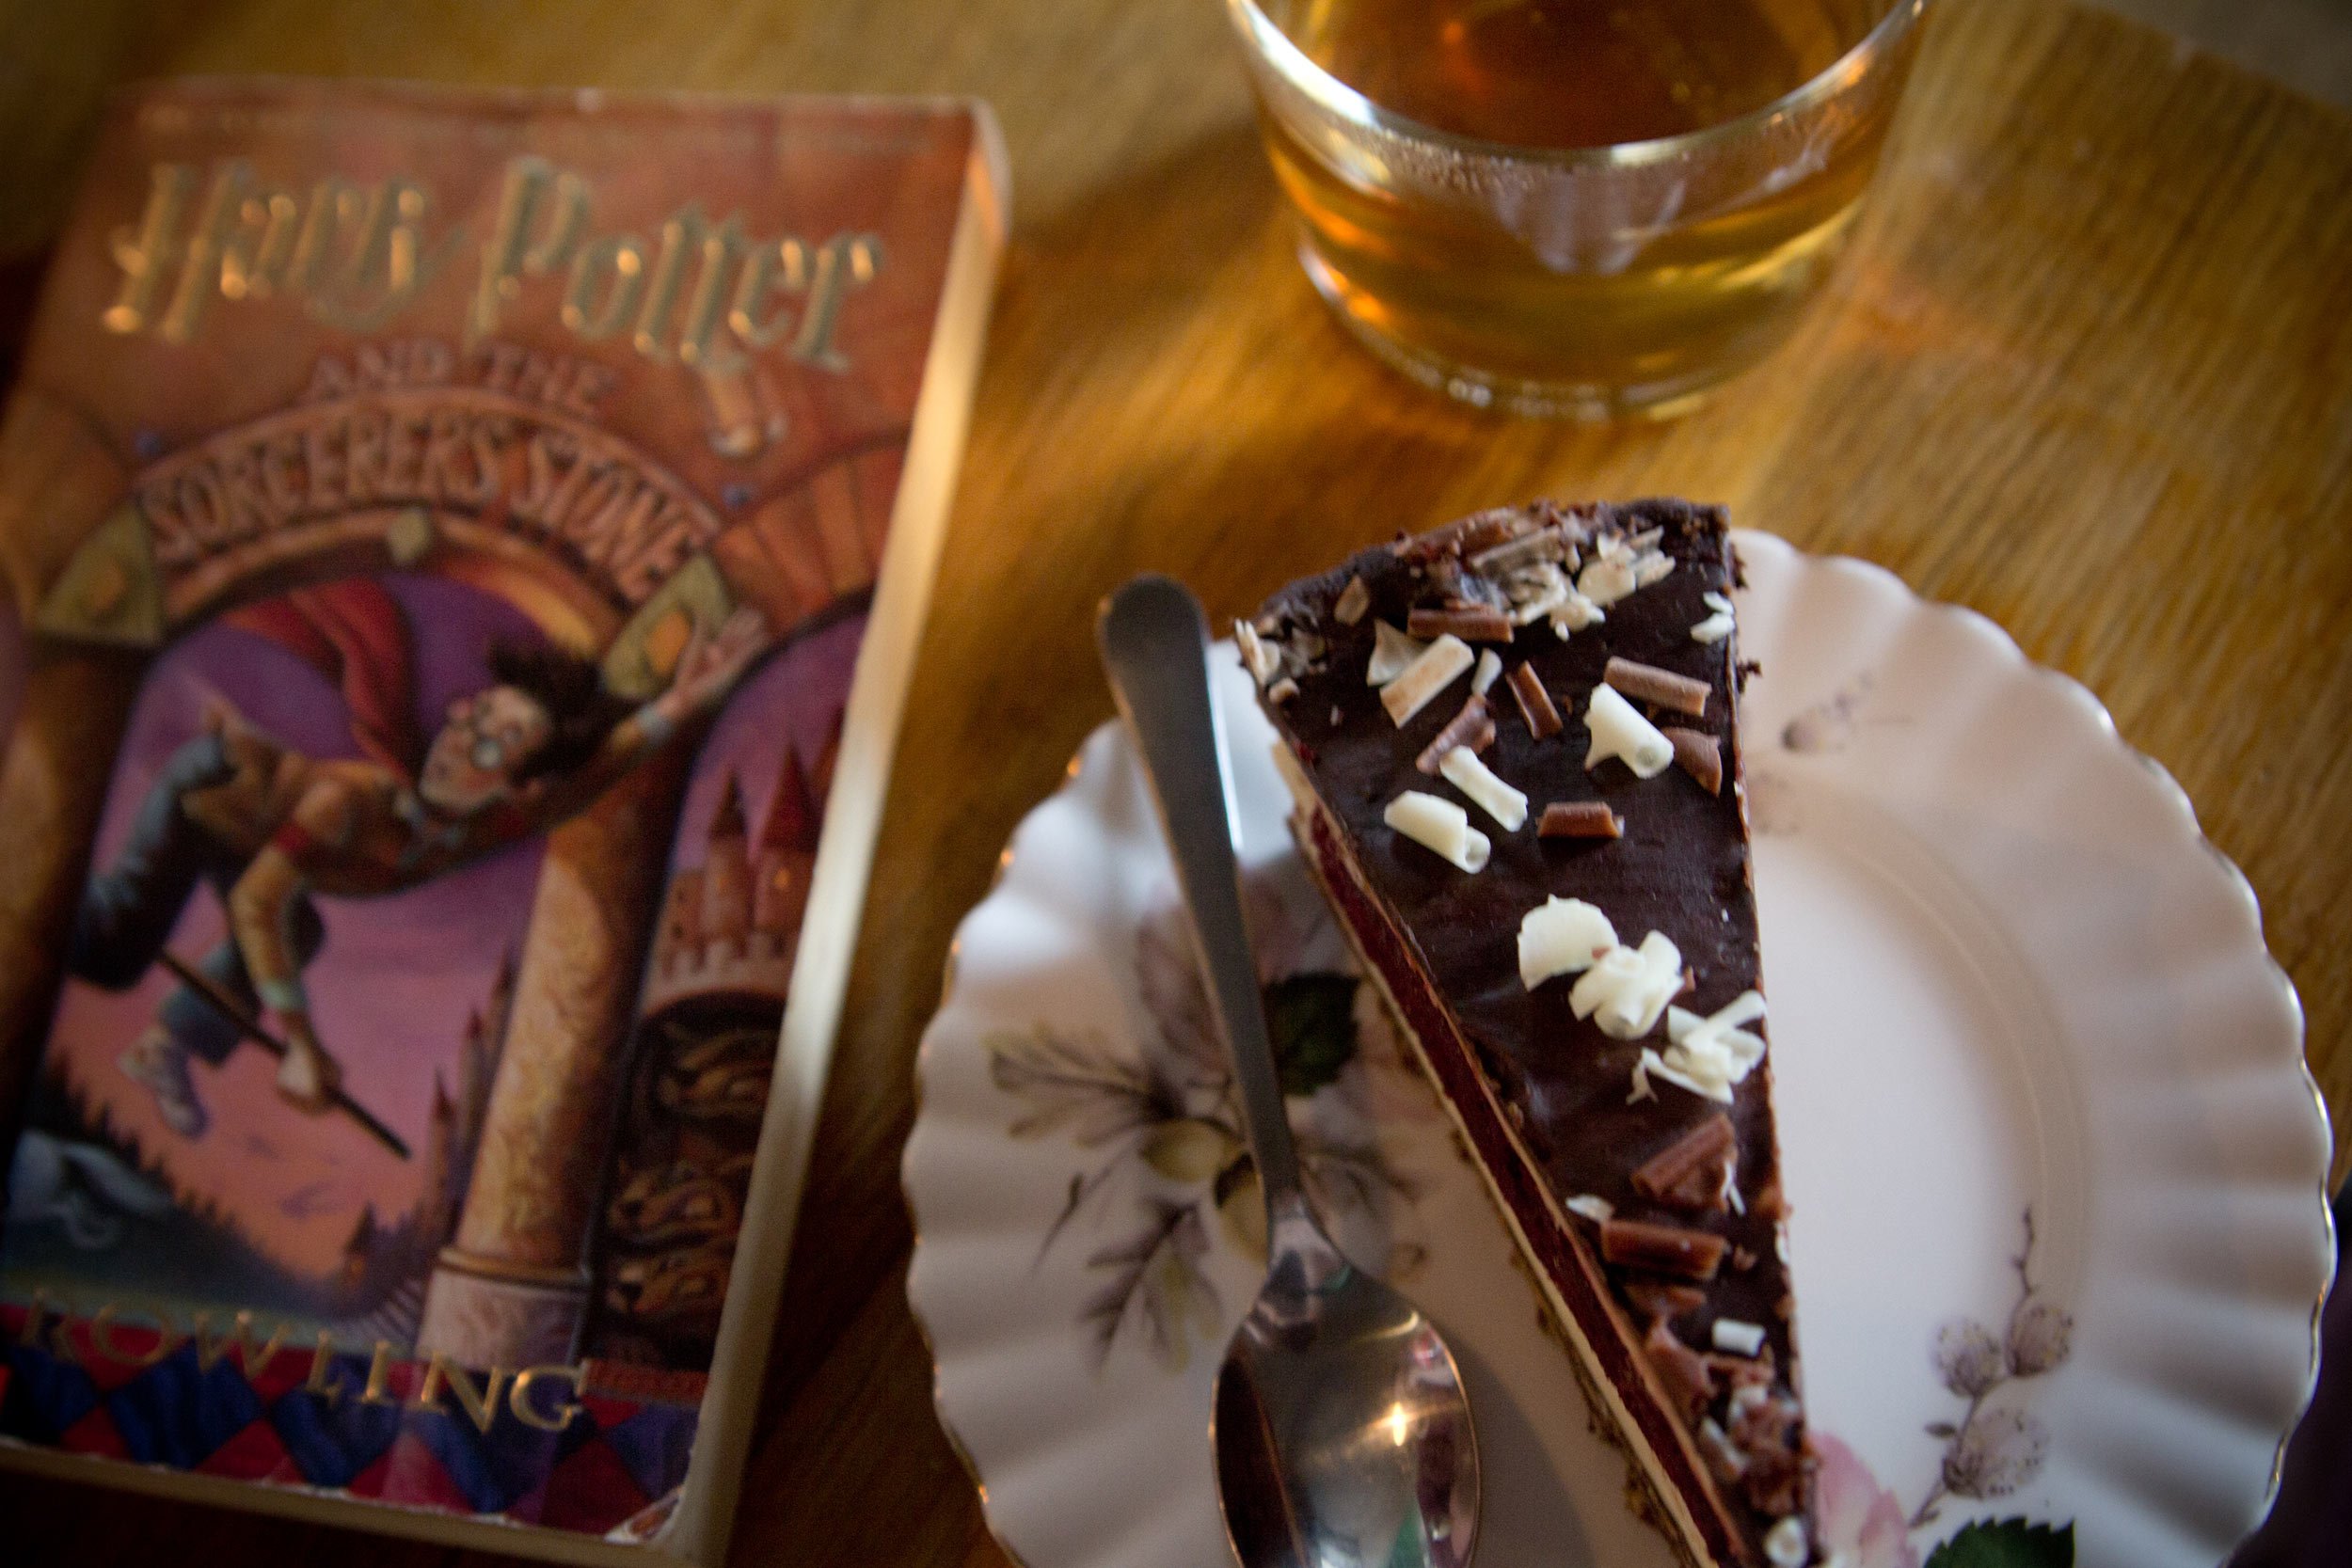 cheesecake-and-tea-and-harry-potter-book-at-nicolsons-cafe